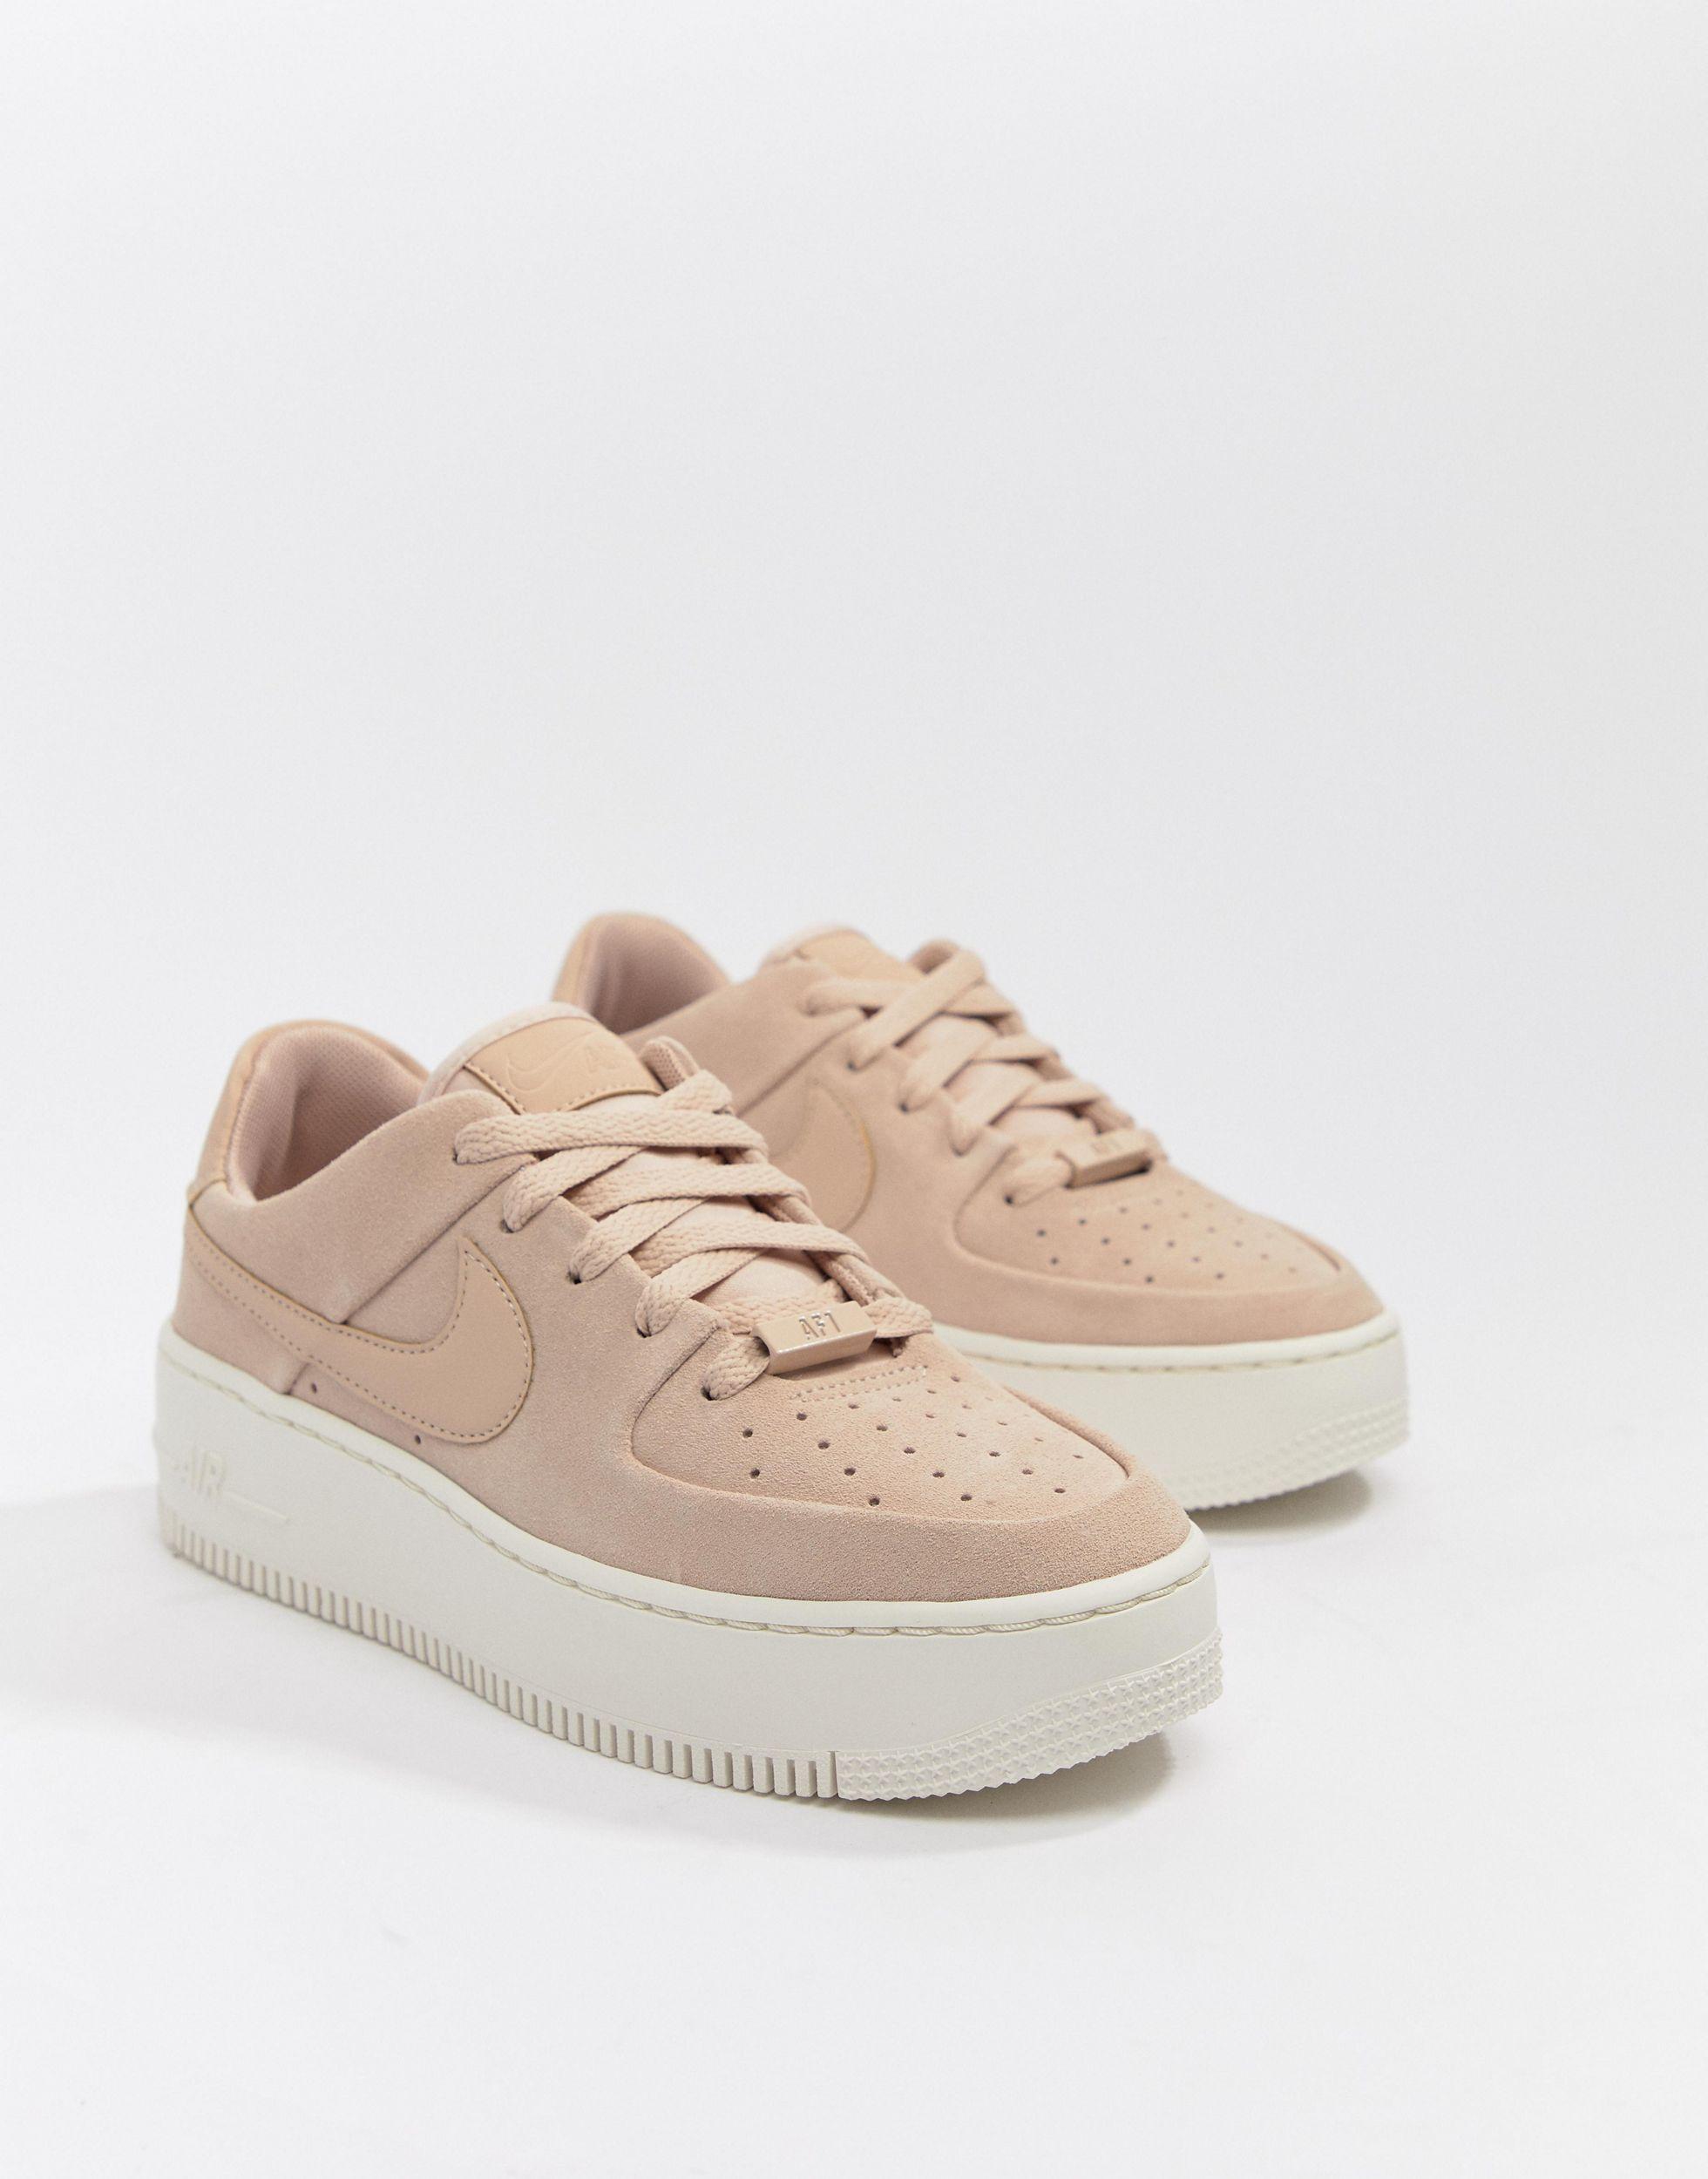 Nike Air Force 1 Pixel Shoe in Natural | Lyst